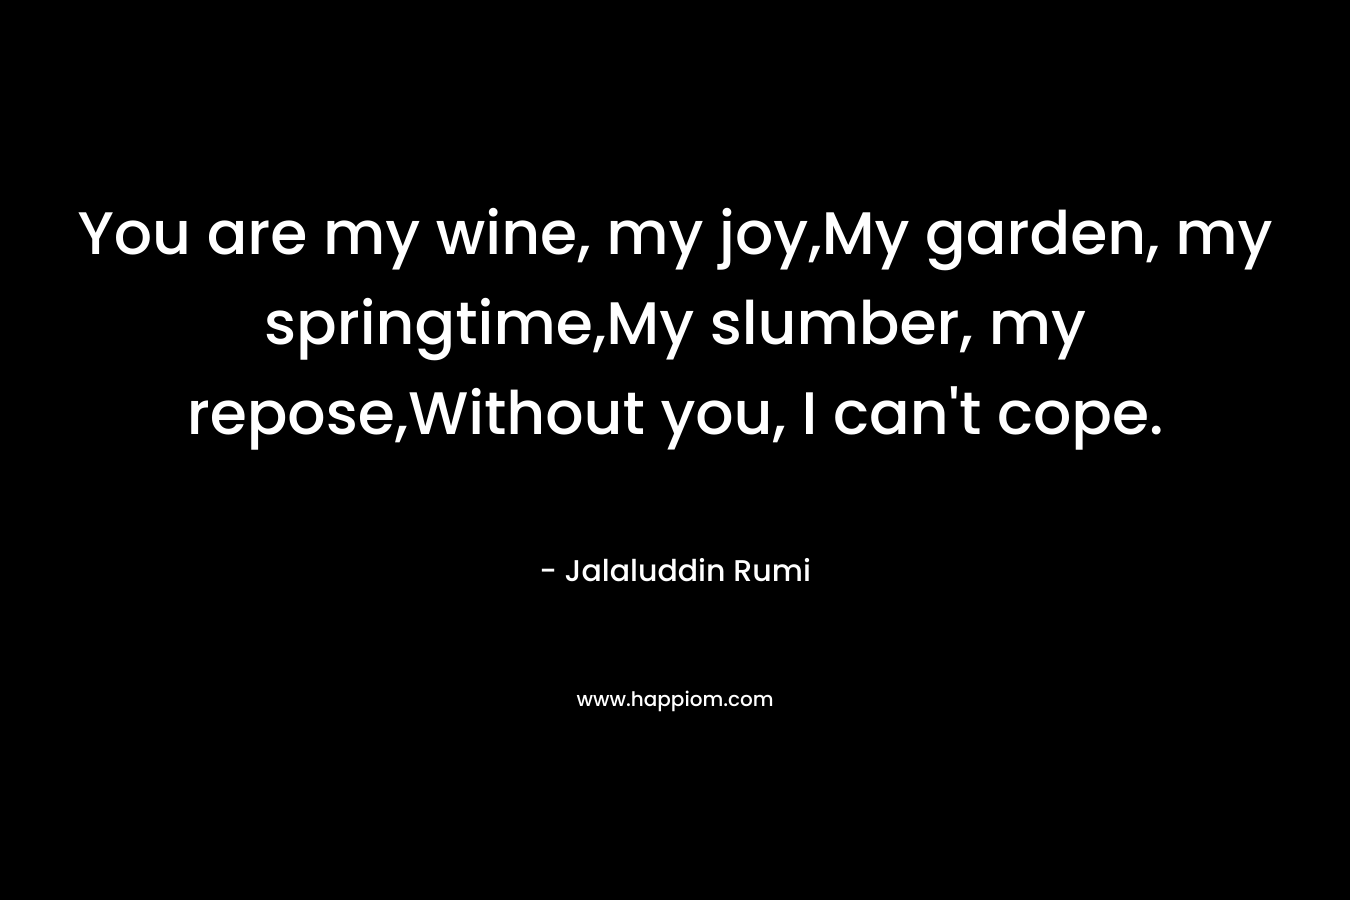 You are my wine, my joy,My garden, my springtime,My slumber, my repose,Without you, I can’t cope. – Jalaluddin Rumi